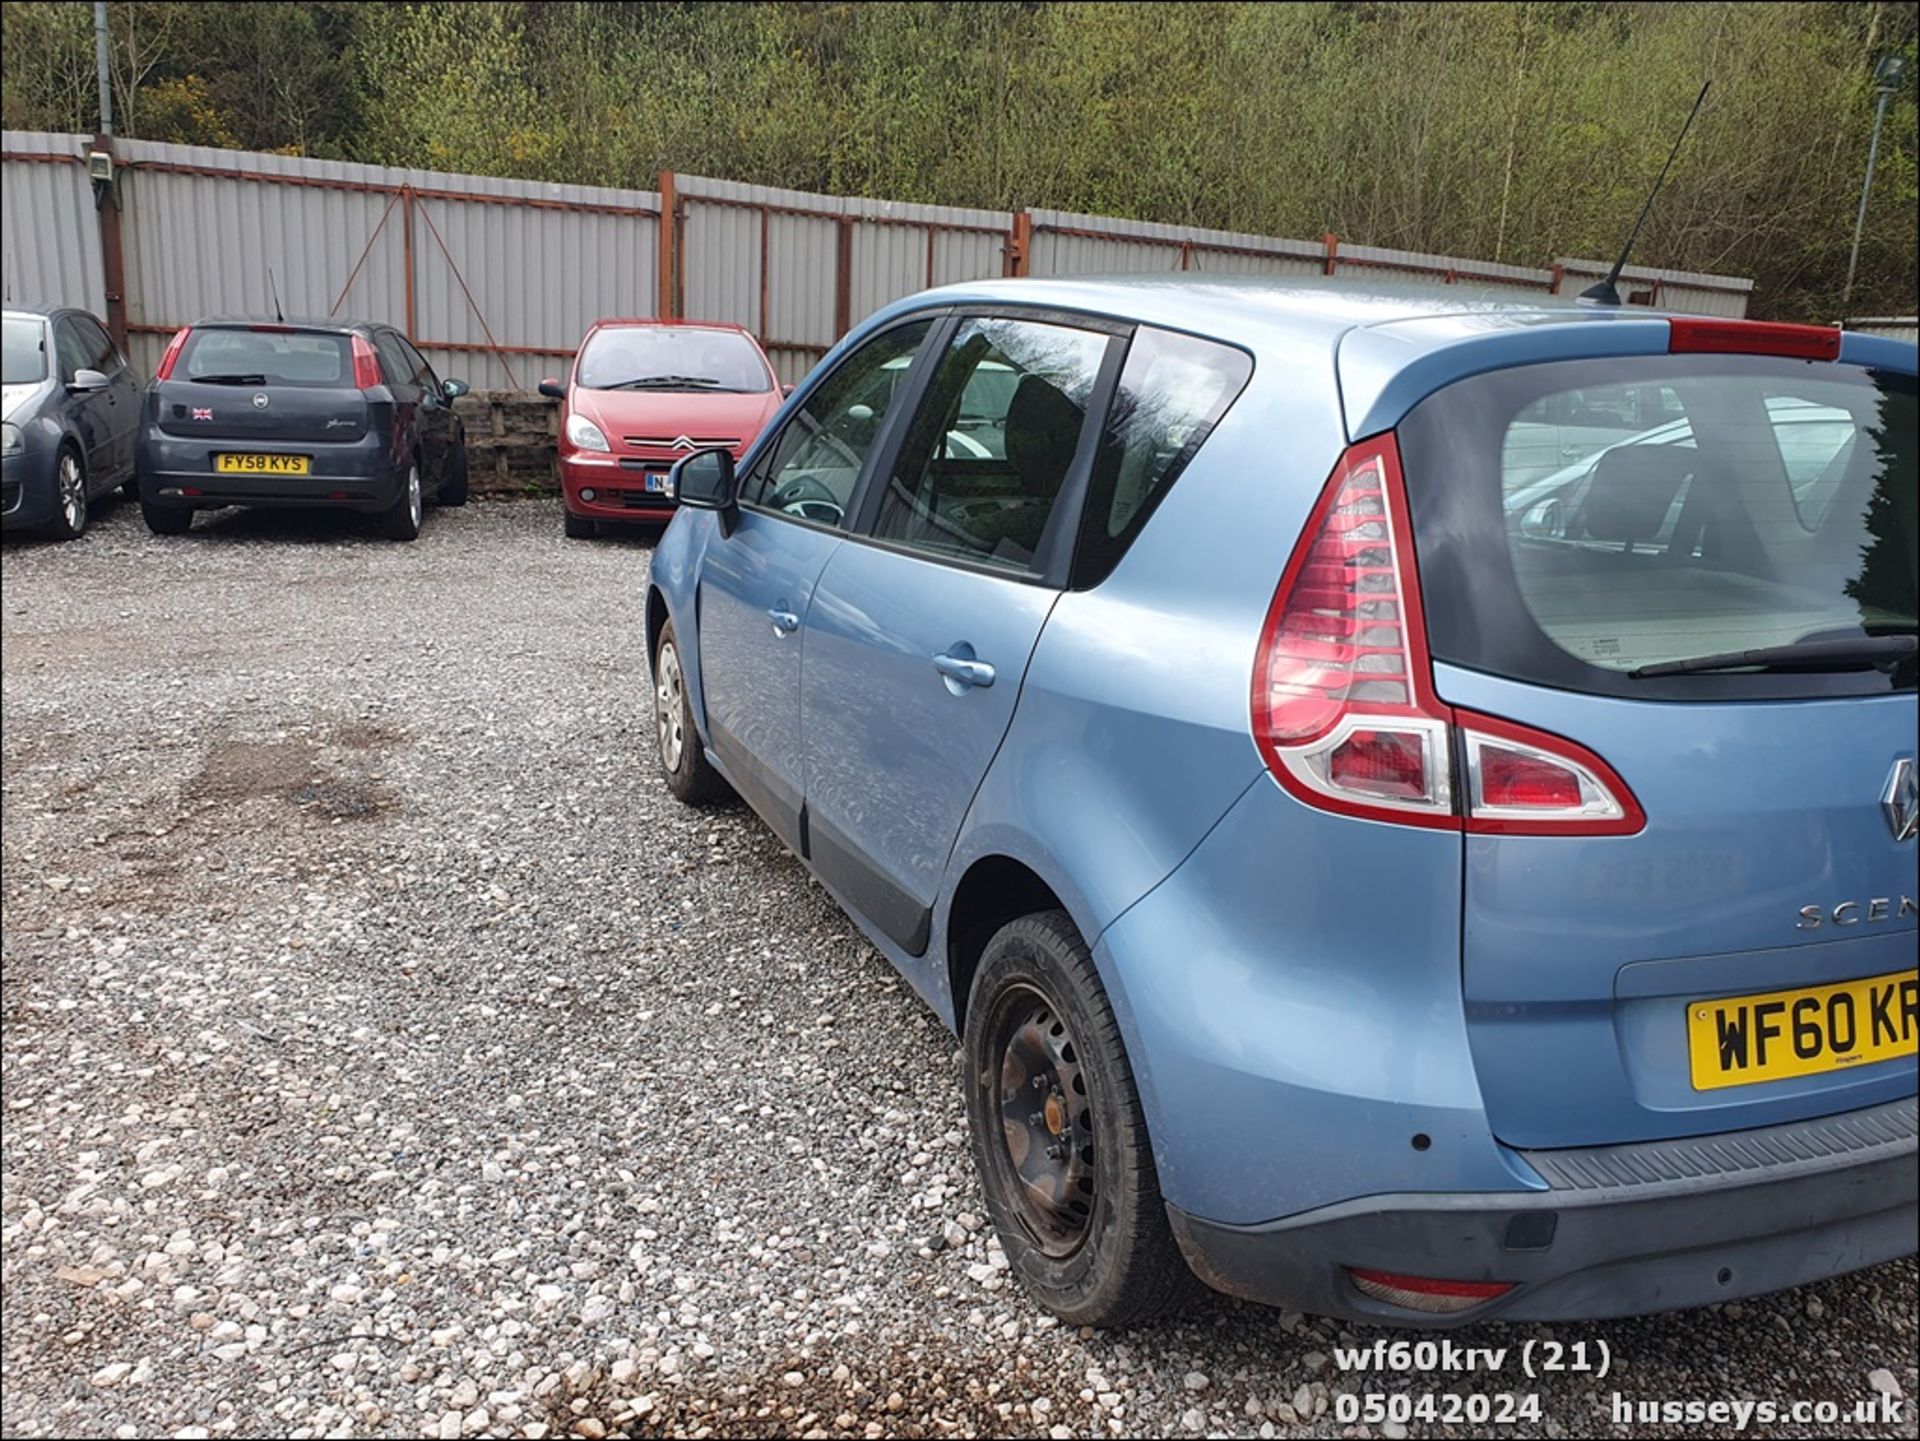 10/60 RENAULT SCENIC EXPRESSION DCI 105 - 1461cc 5dr MPV (Blue) - Image 22 of 50